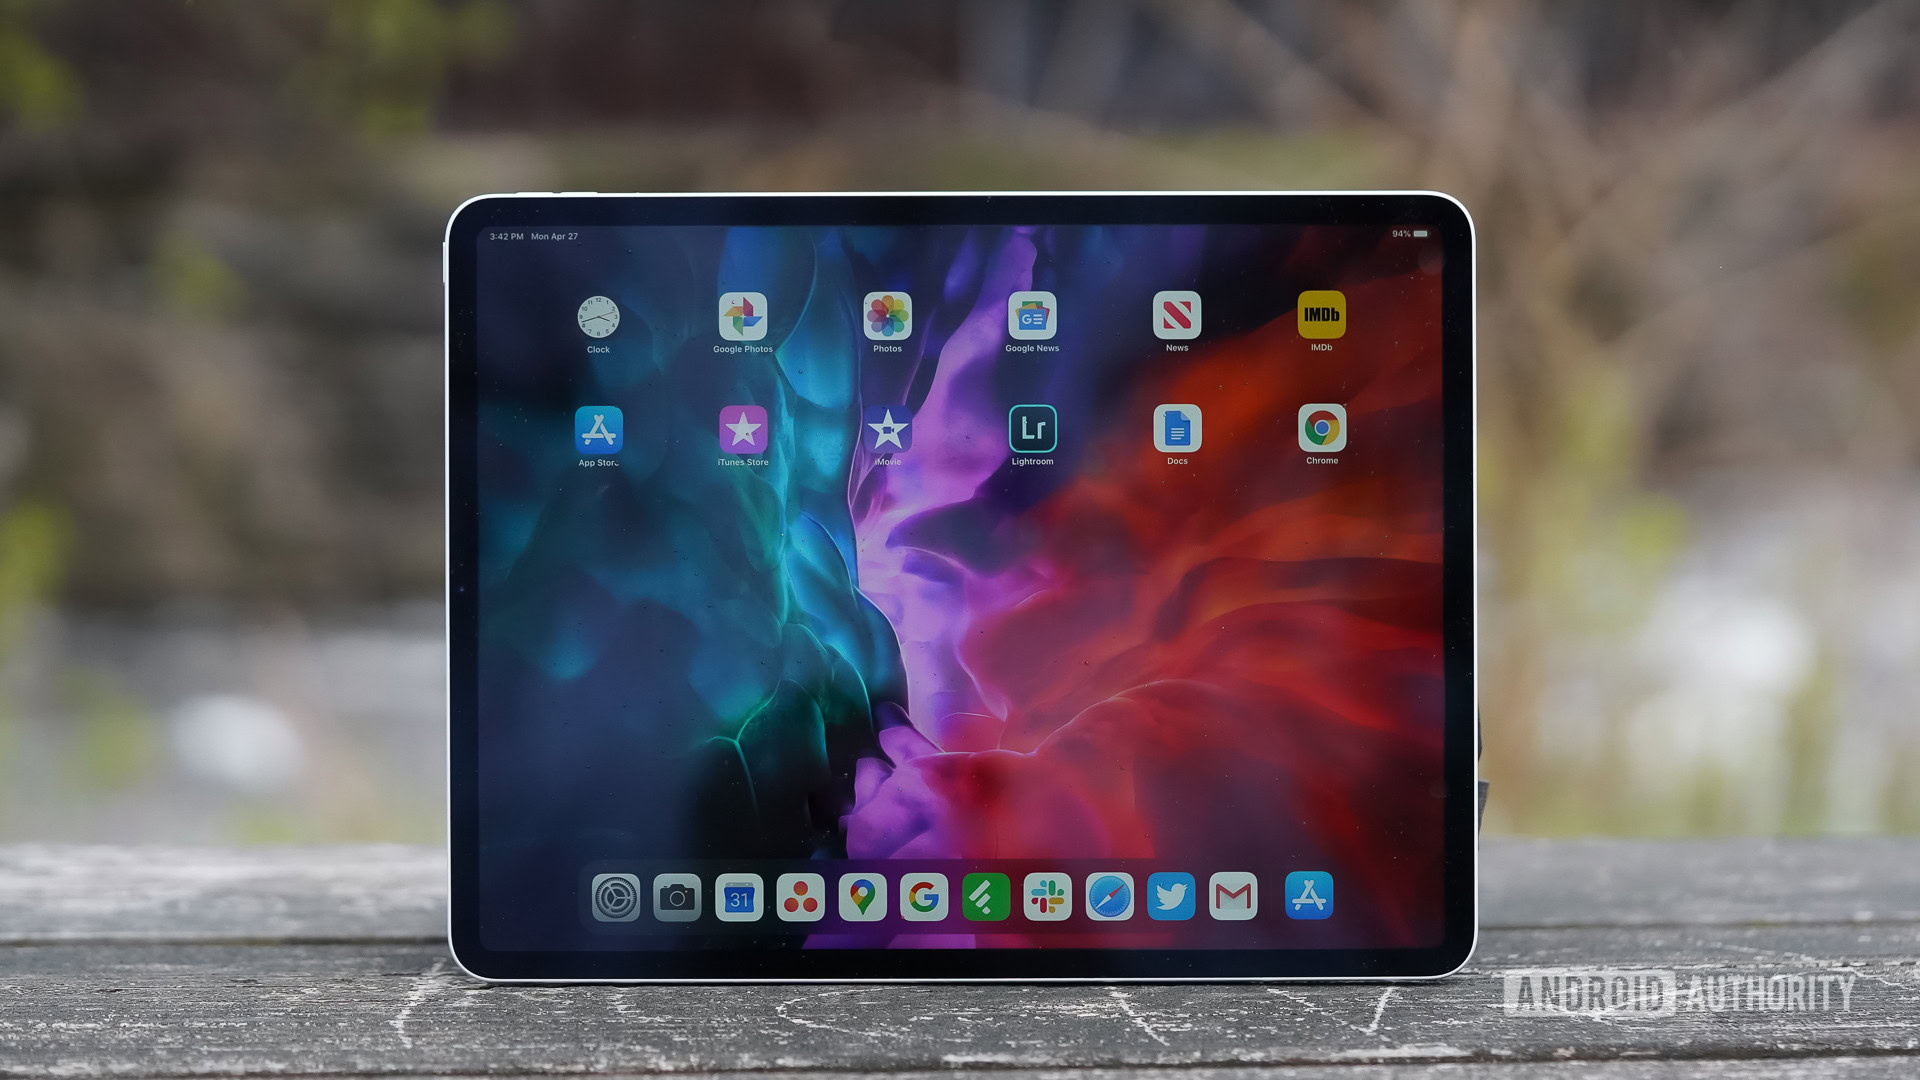 Apple iPad Pro 12.9-inch Review: The Best Gets Better